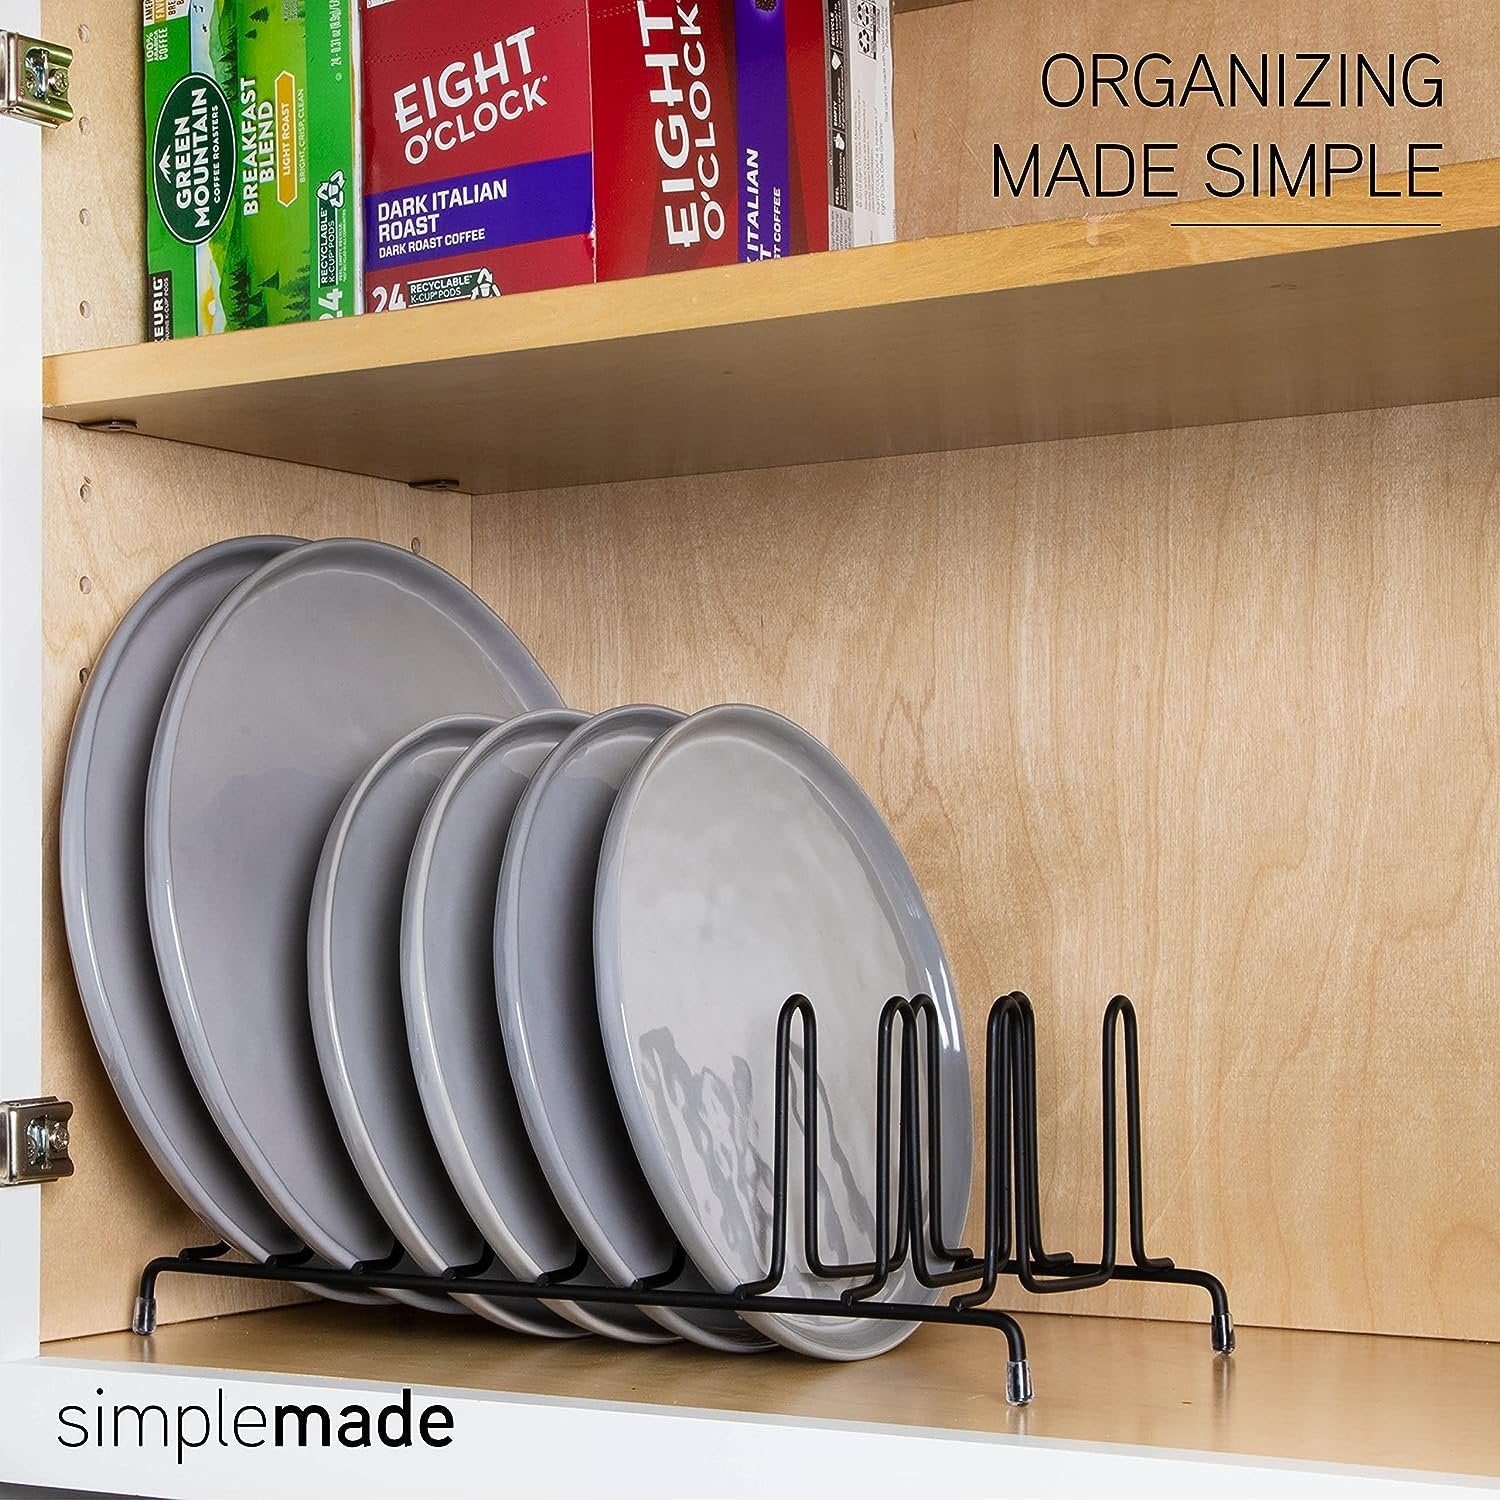 SIMPLEMADE Kitchen Dish Rack Organizer - 2 Wire Metal Cabinet Organizers and Storage Rack for Plates, Dishes, Pots, Pot Lids, Pan Lids, Container Lids - Shelf, Counter & Pantry Organization (Black)